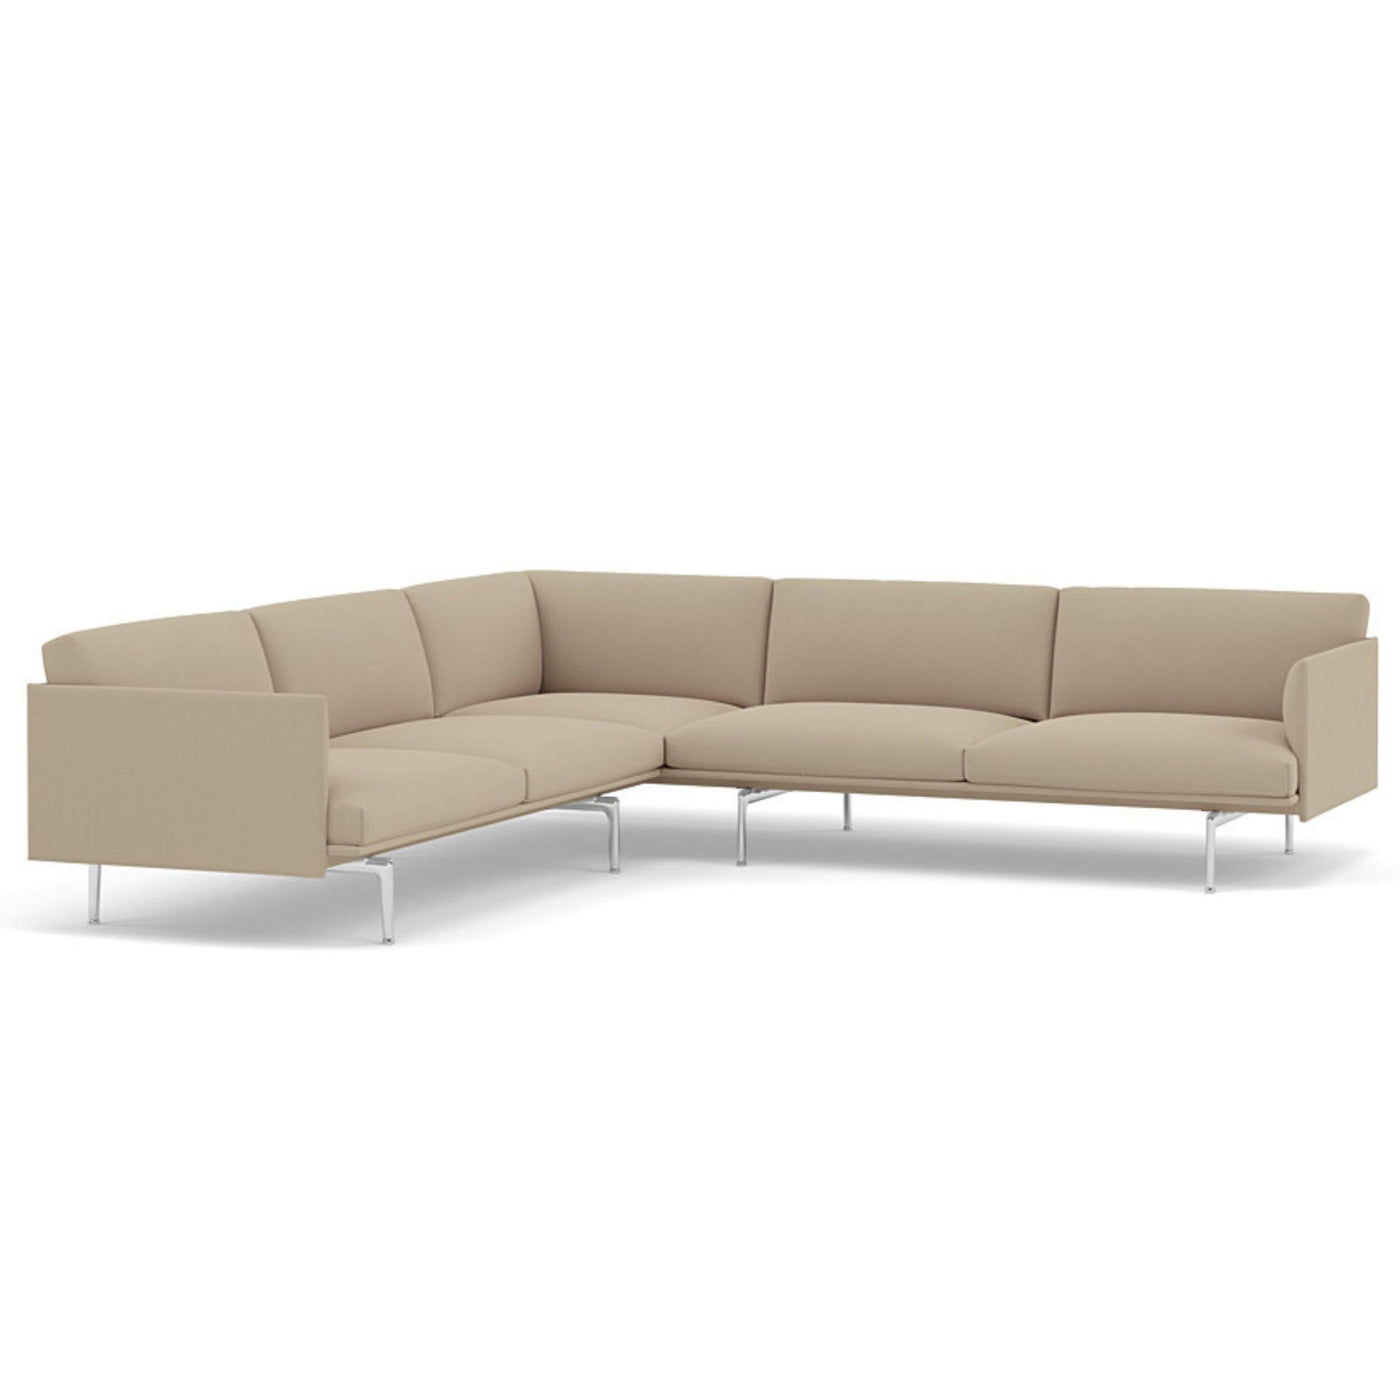 Muuto Outline Corner Sofa. Made to order from someday designs. #colour_clara-248